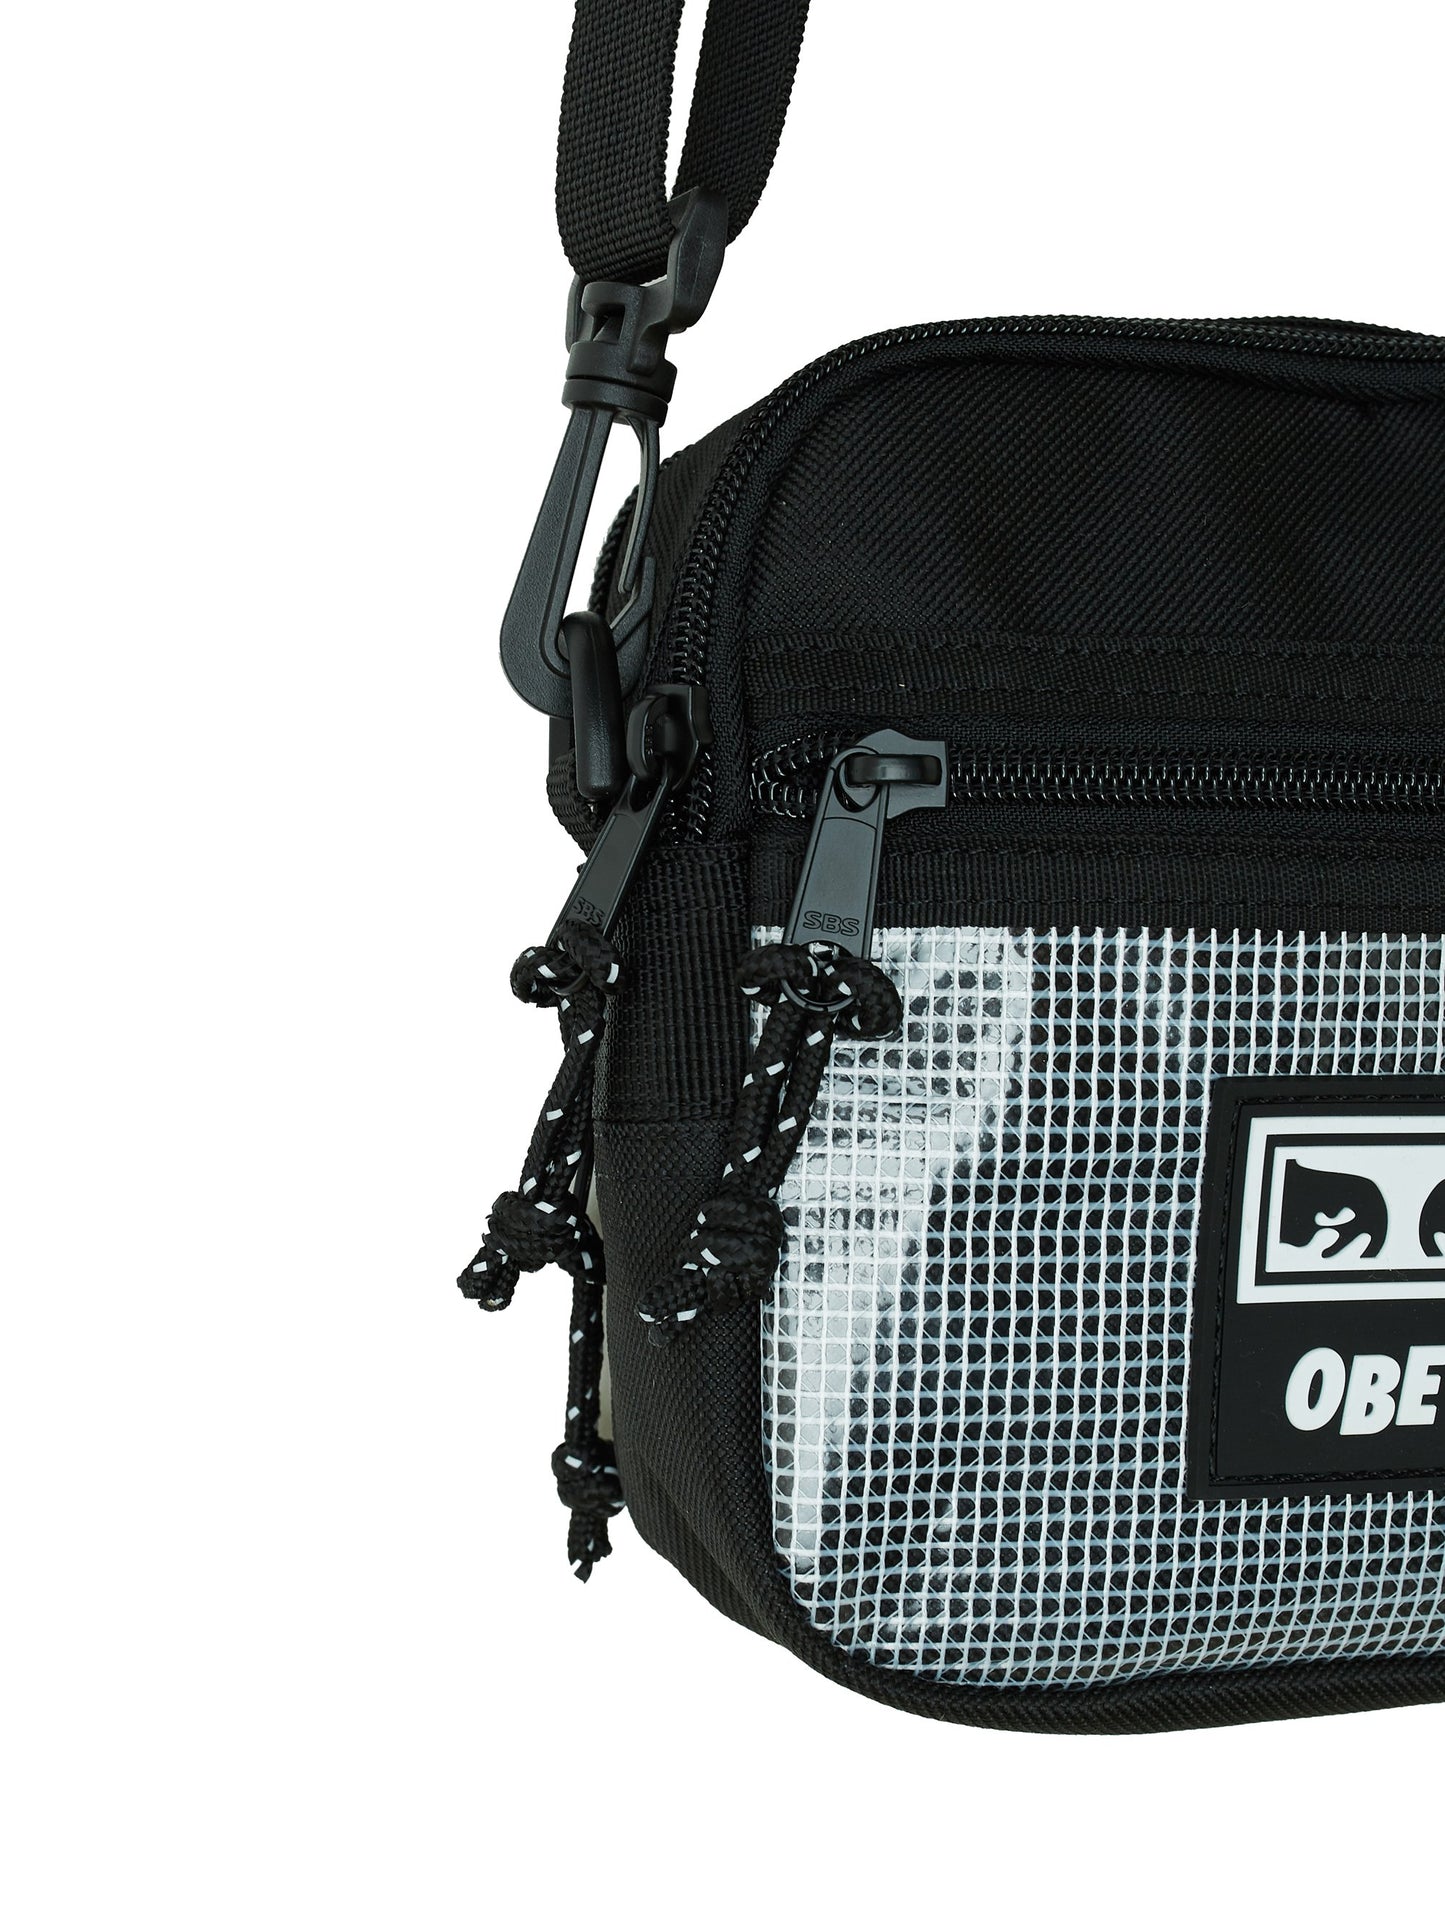 OBEY - Conditions Traveler Bag II, Black